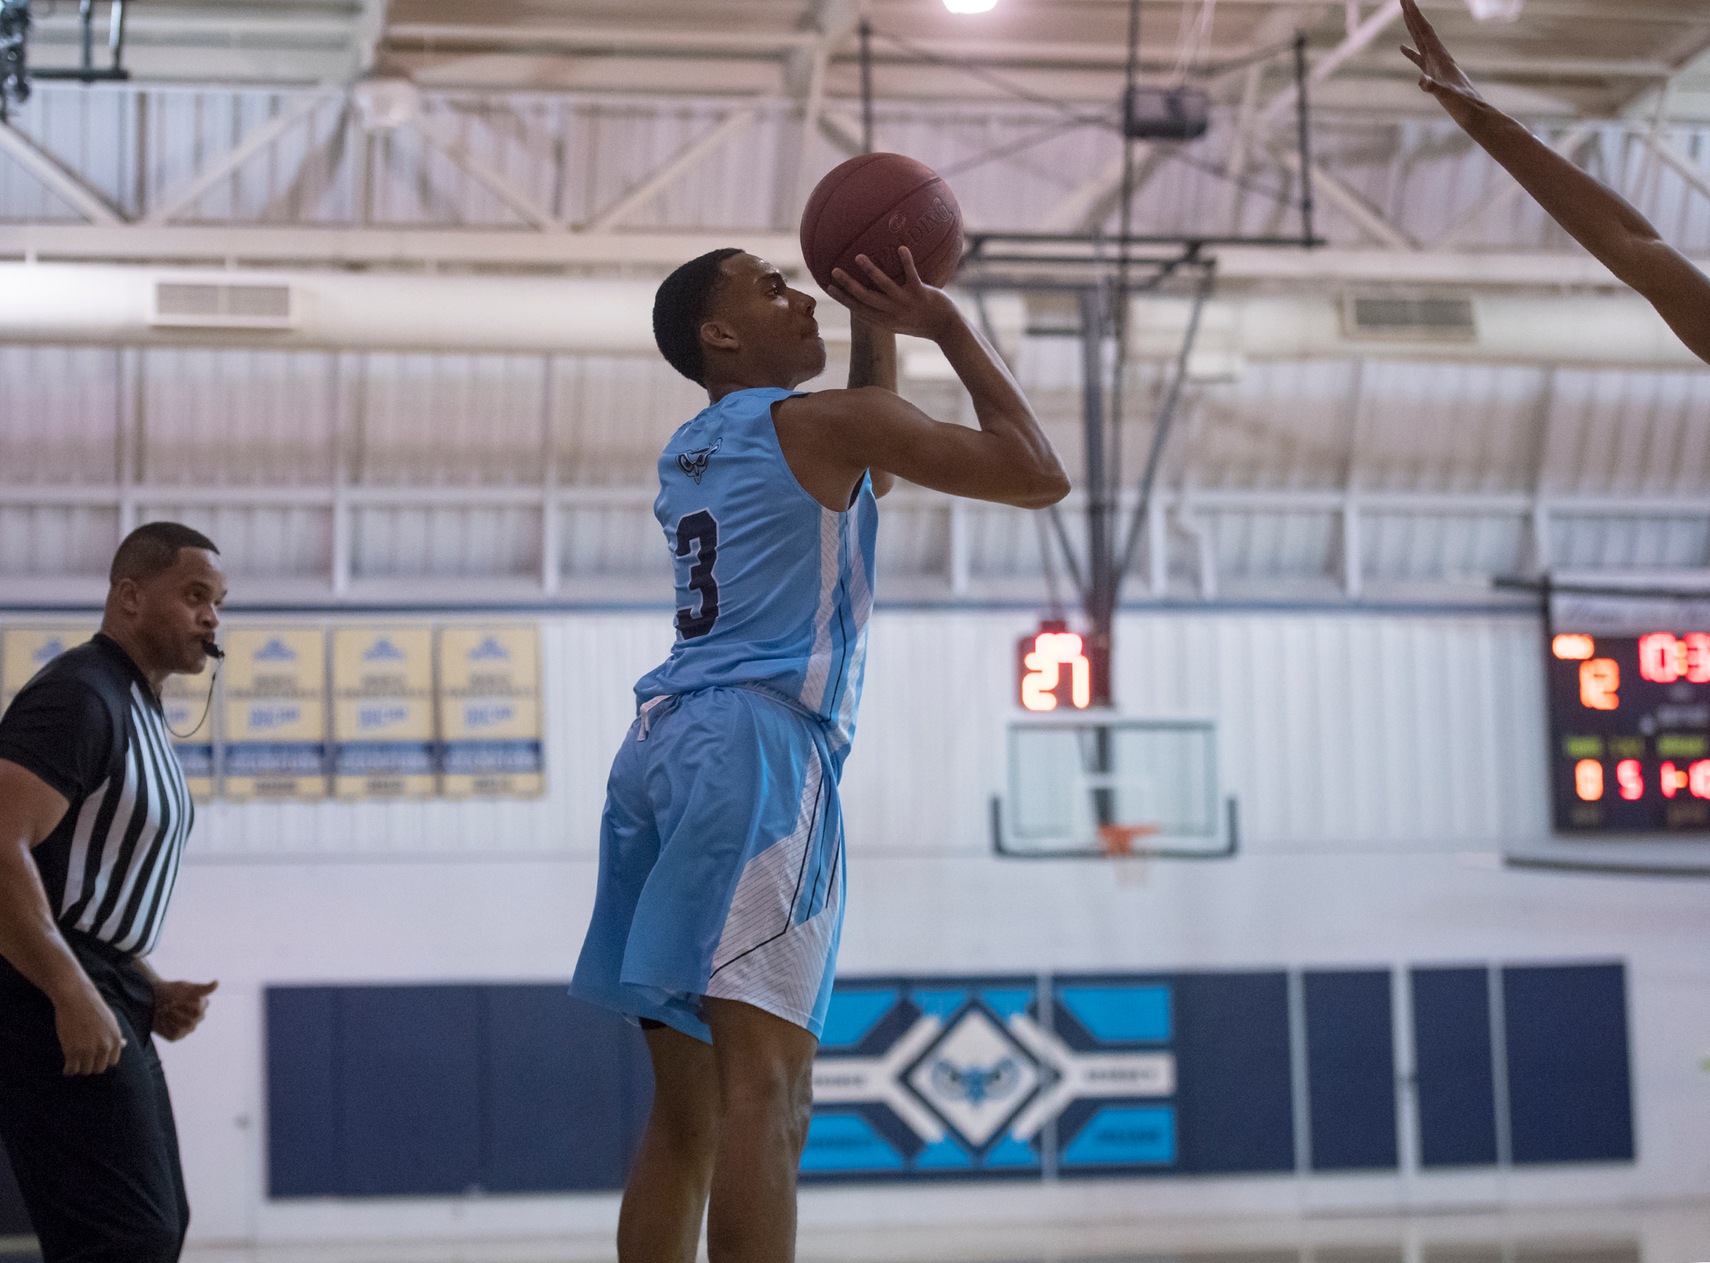 Men’s Basketball Holds Off Late Push From Chesapeake College To Earn 67-61 Road Victory